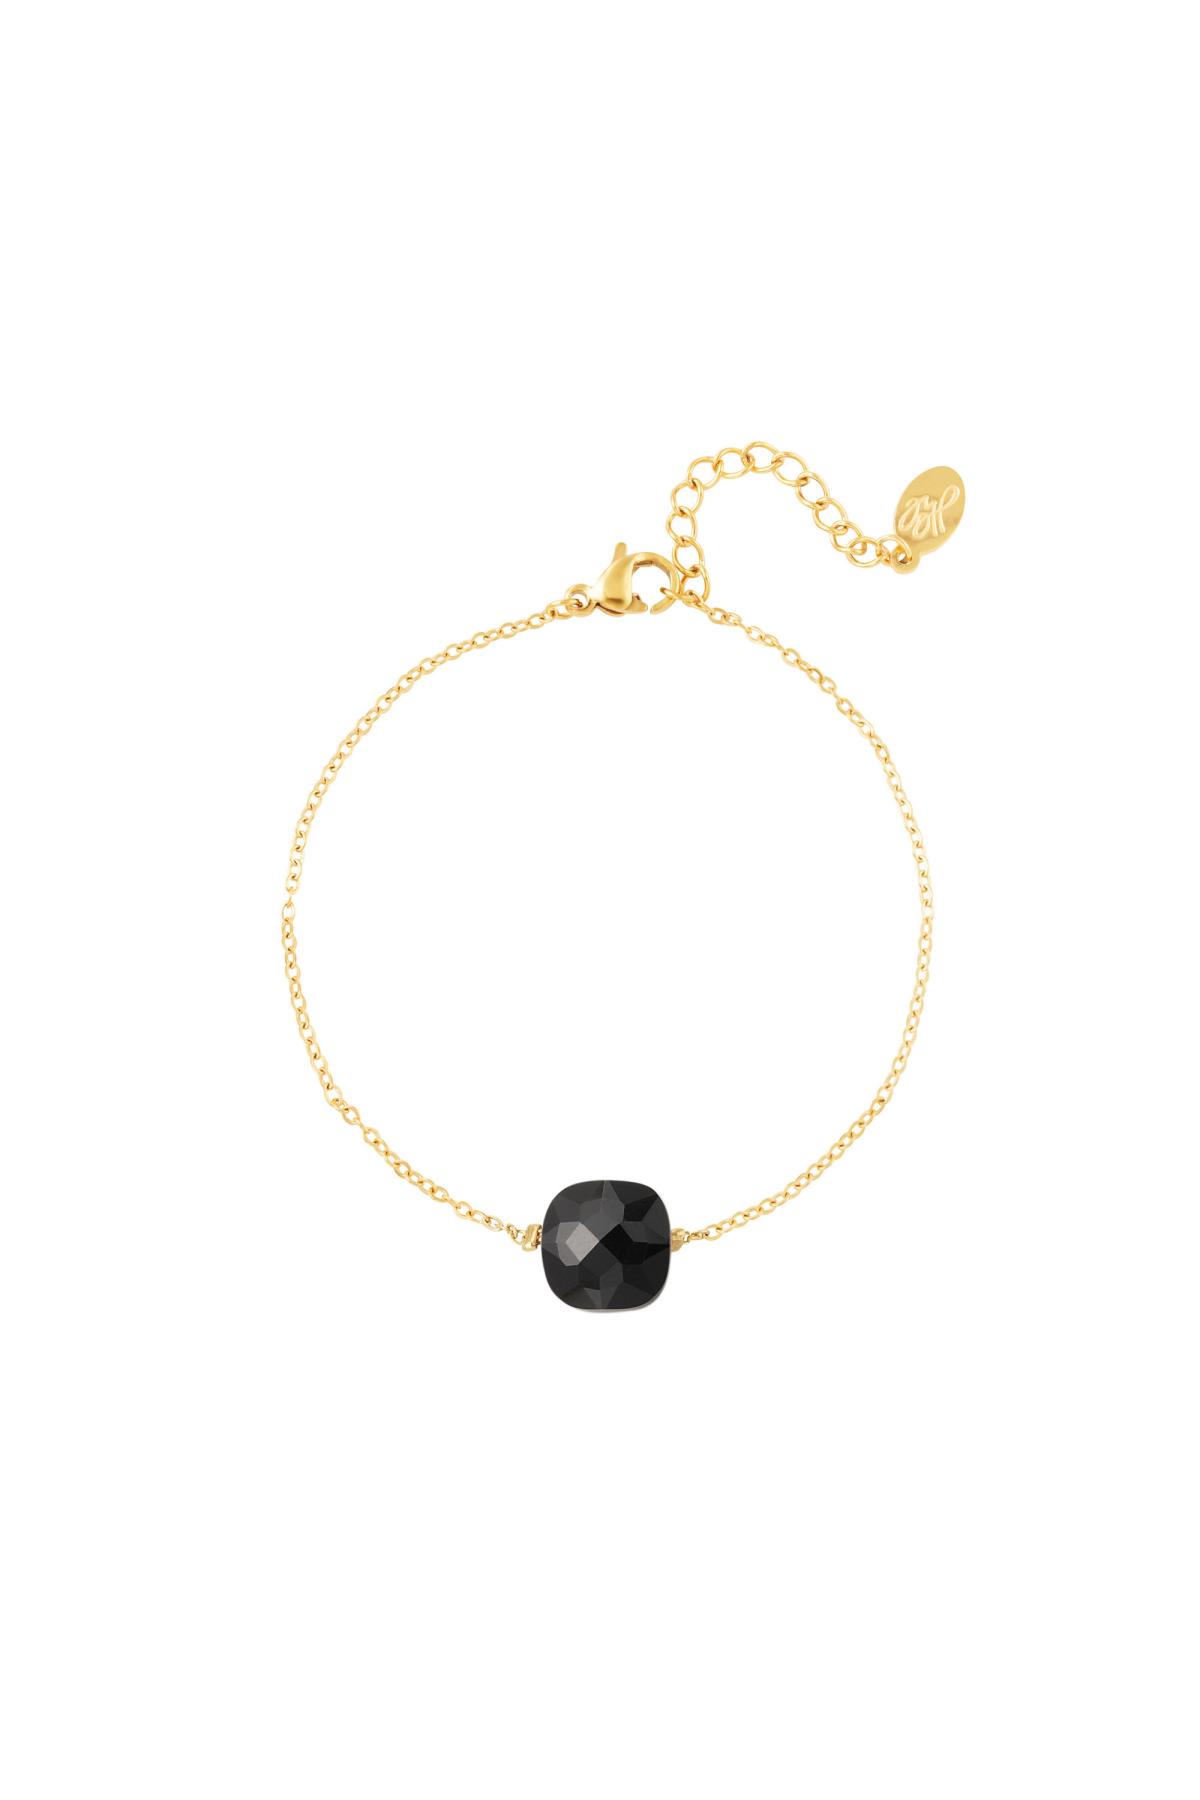 Bracelet with stone - Natural stones collection Black & Gold Stainless Steel 